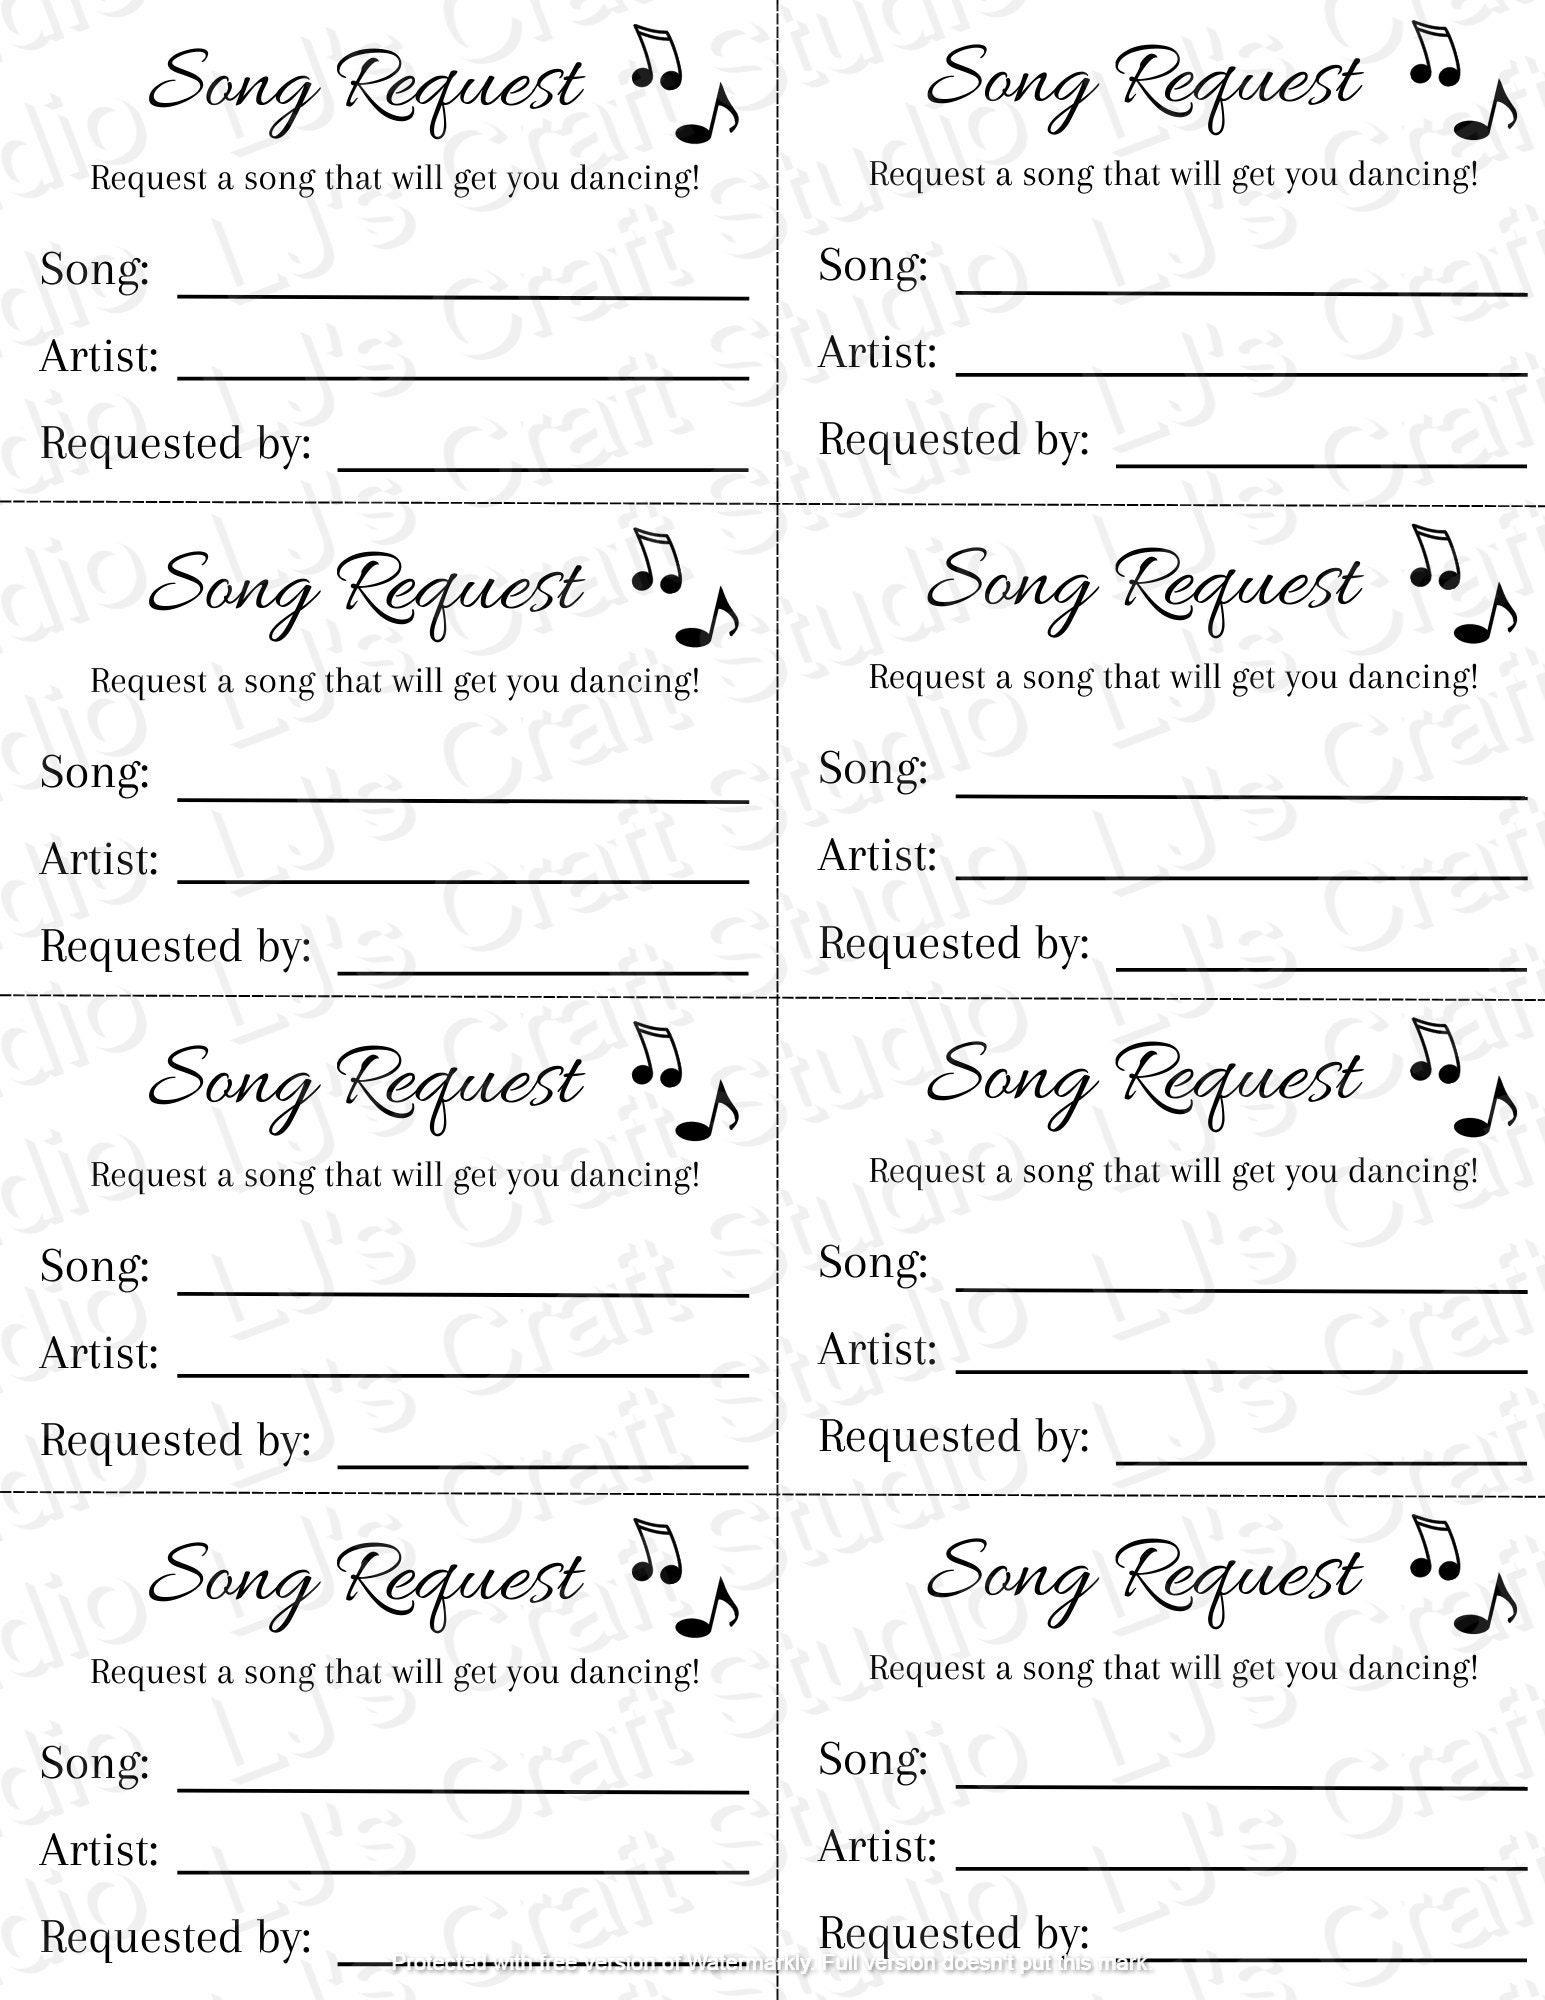 song-request-print-out-etsy